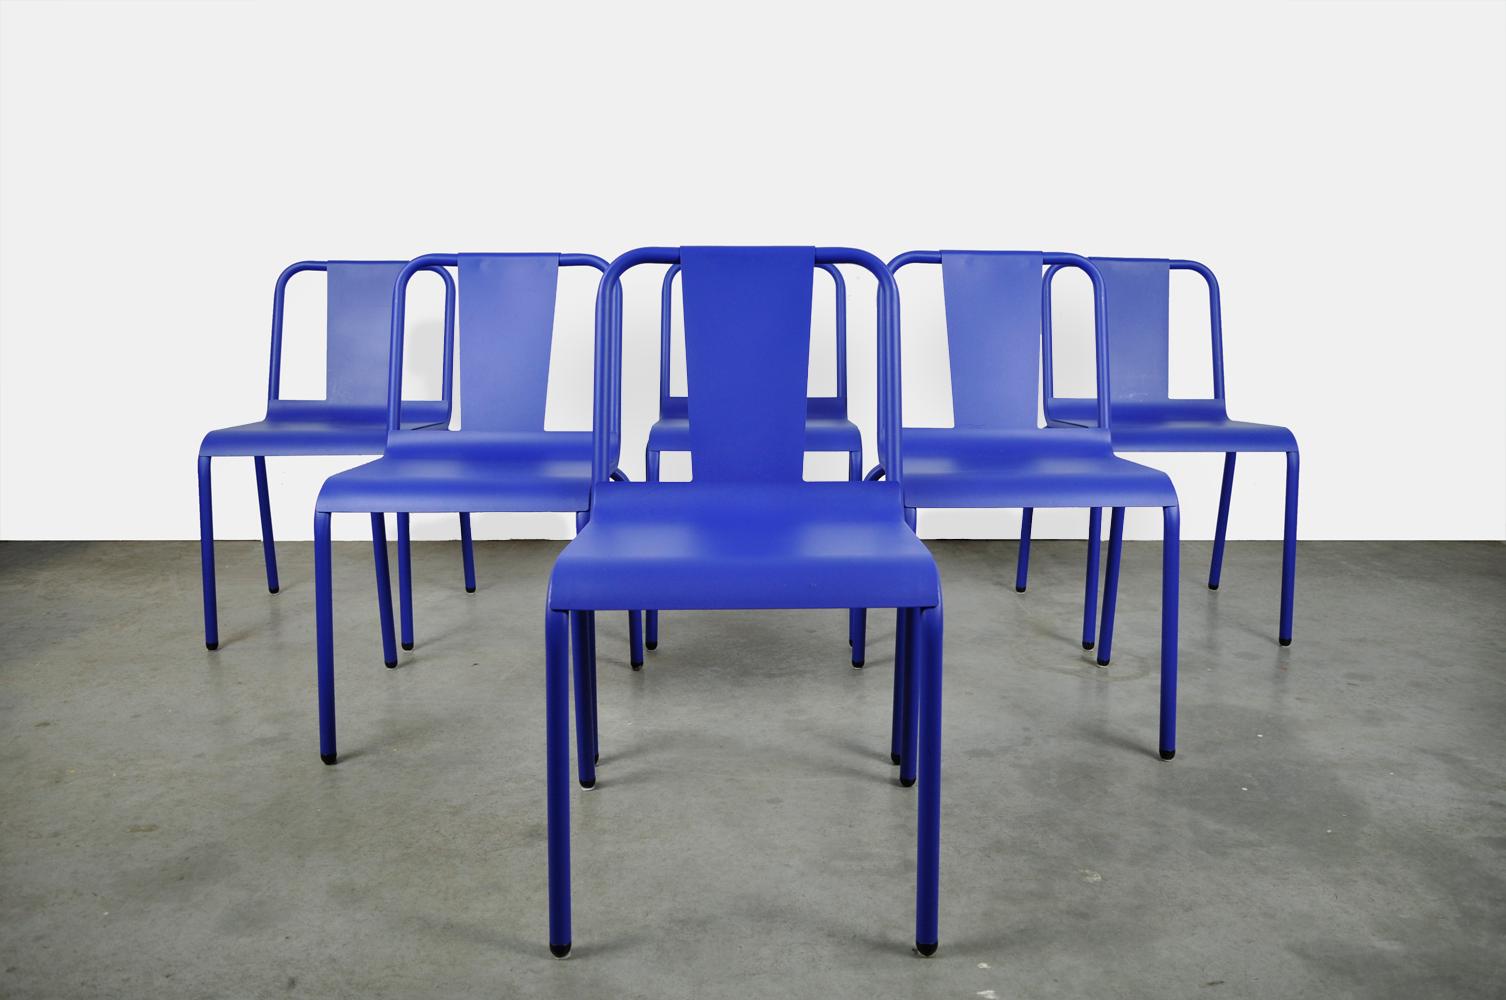 Modern Set of 6 Design Chairs by Isi Design Group, Produced by Isimar, 2000 Spain